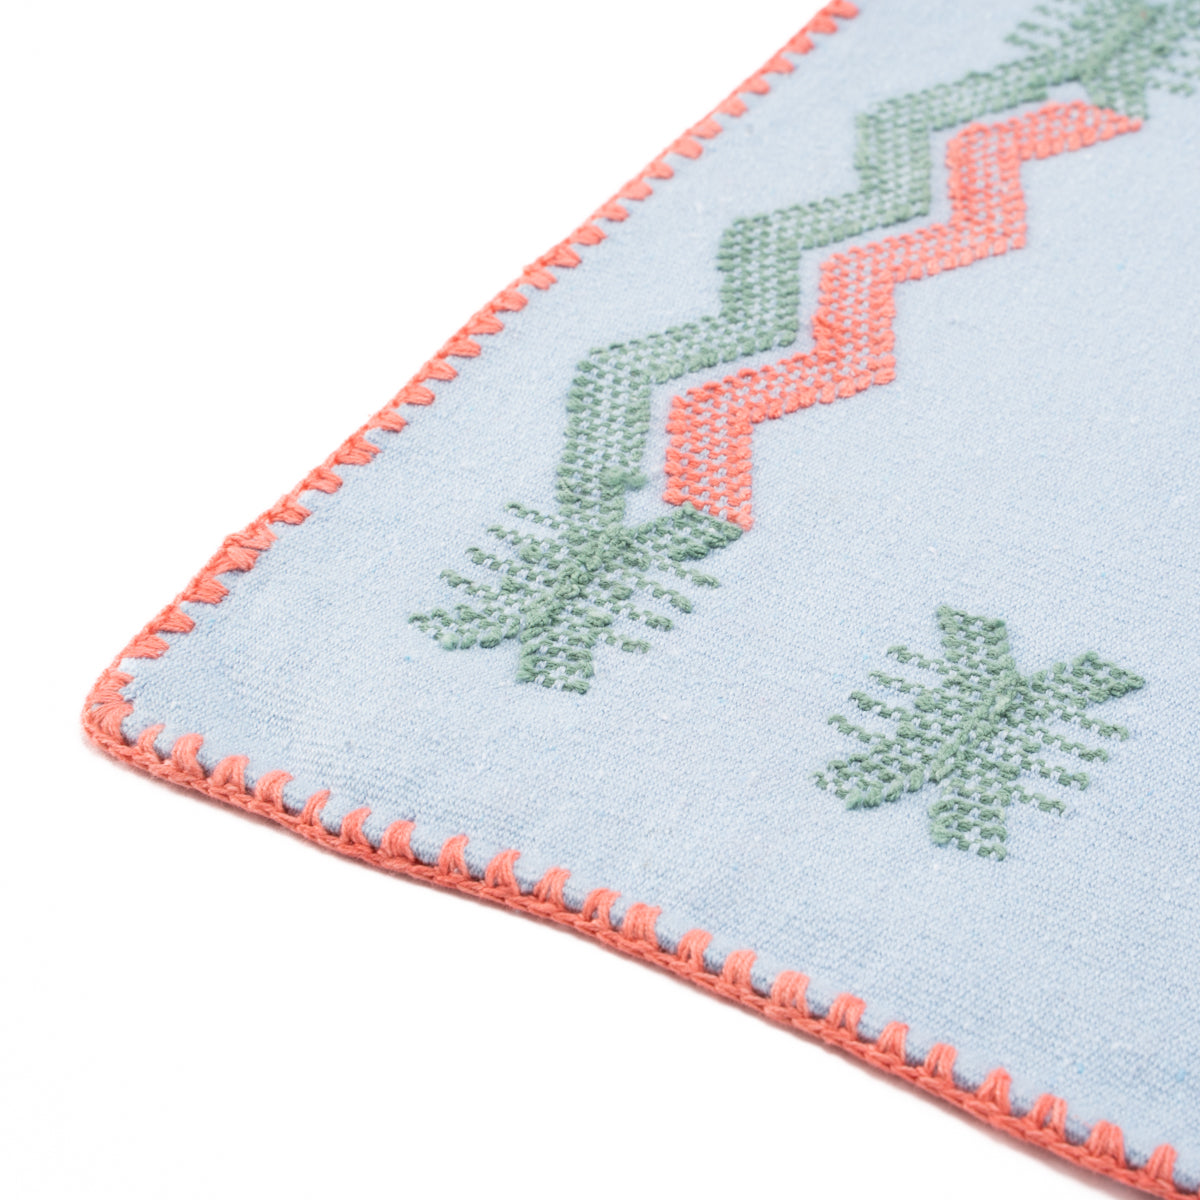 Ciempies Handwoven Placemat (Set of 2)